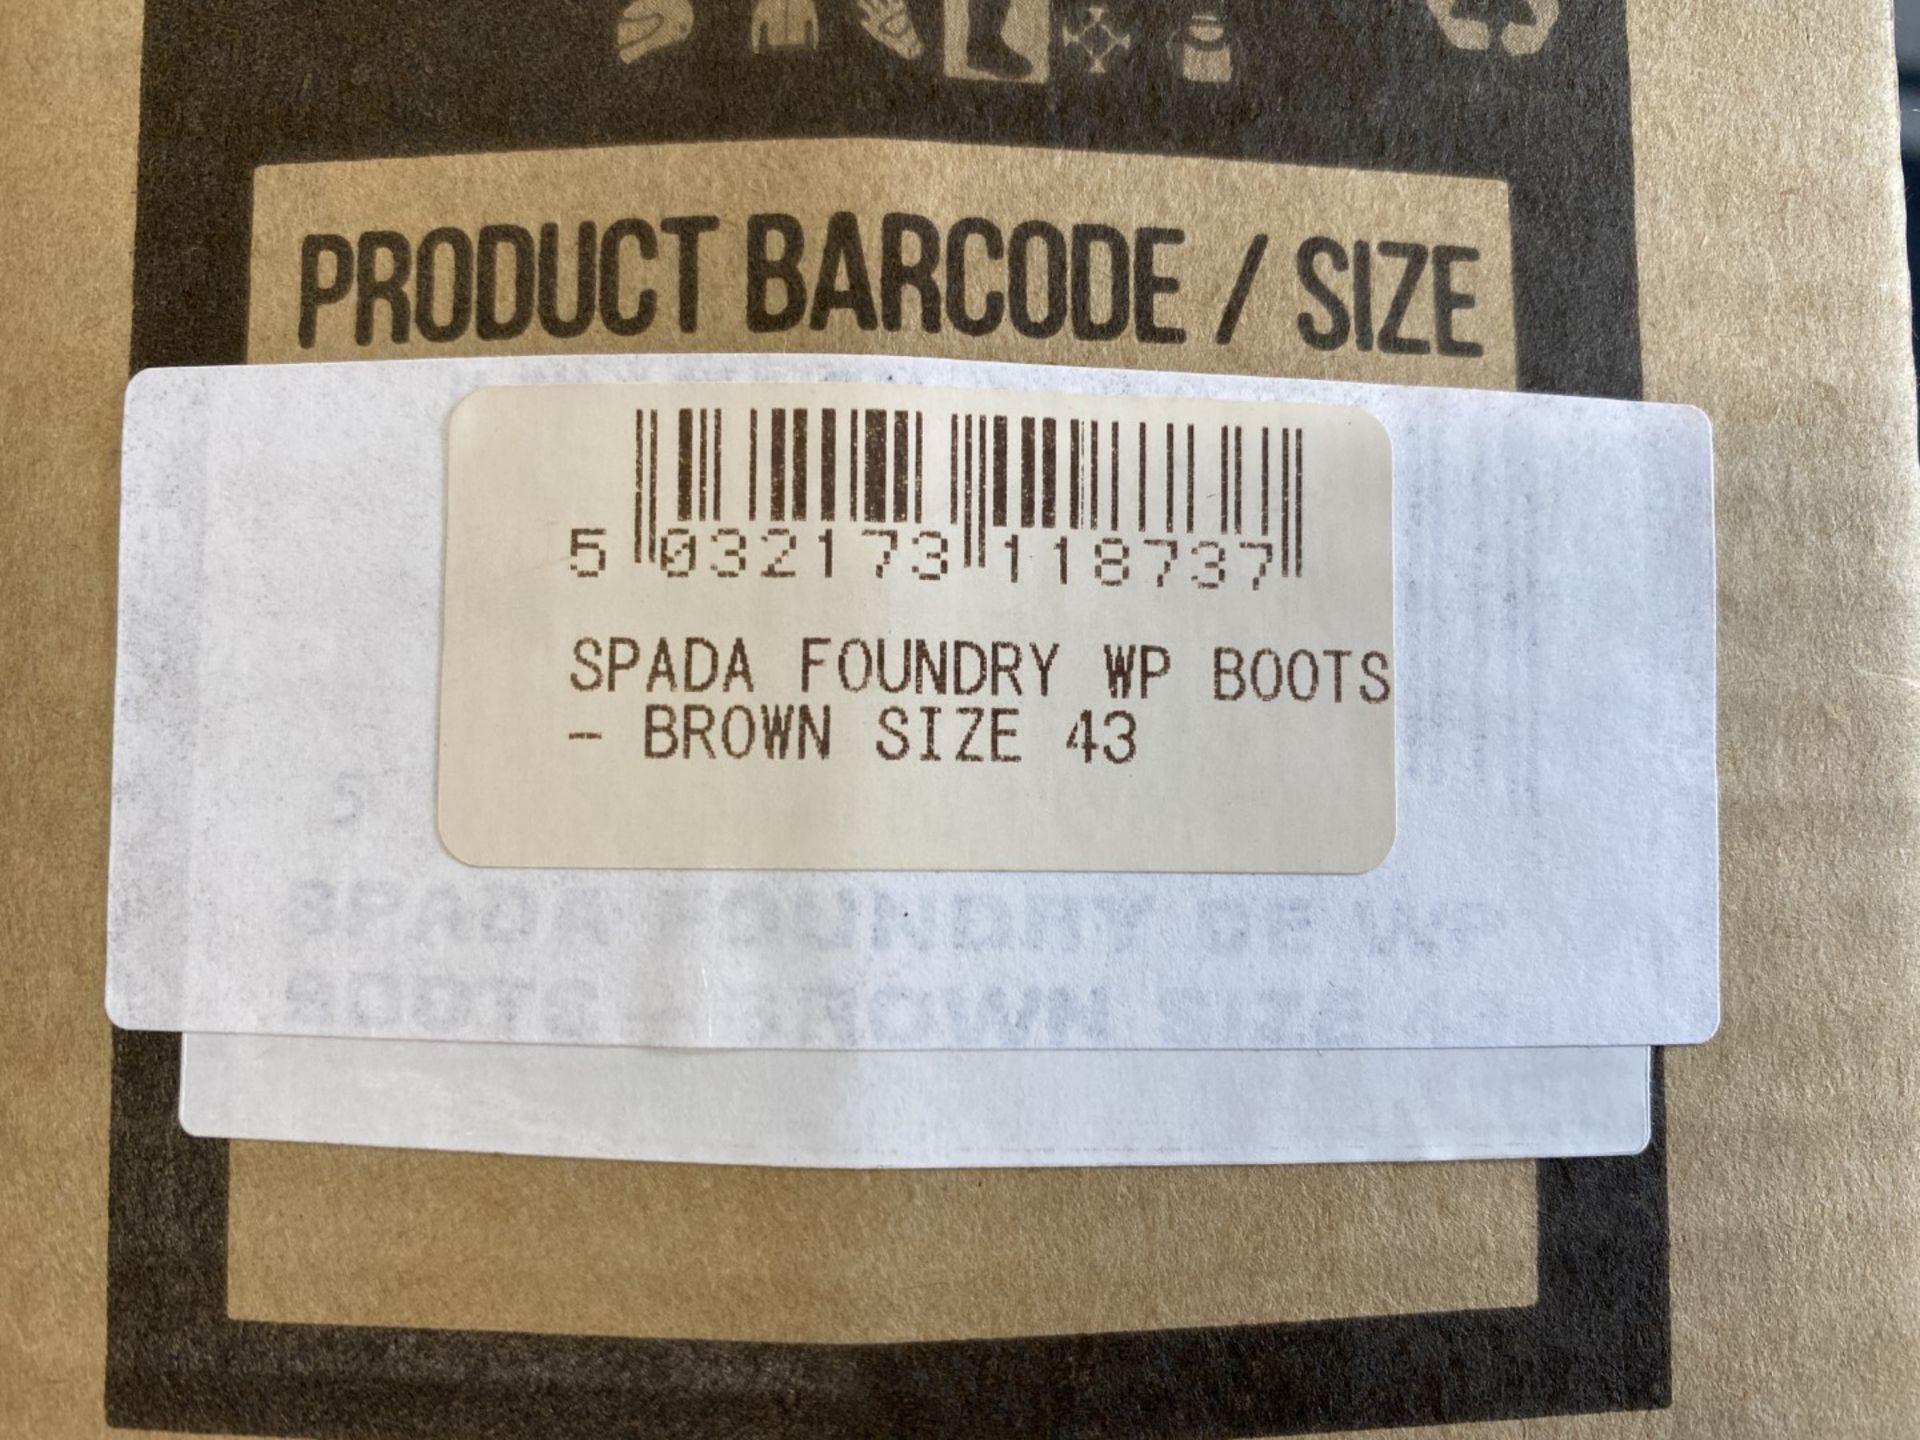 Spada Foundry WP Boots - Size 43 - Brown - Motorcycle / Motorbike Boots - Moto footwear - RRP £89.99 - Image 5 of 5